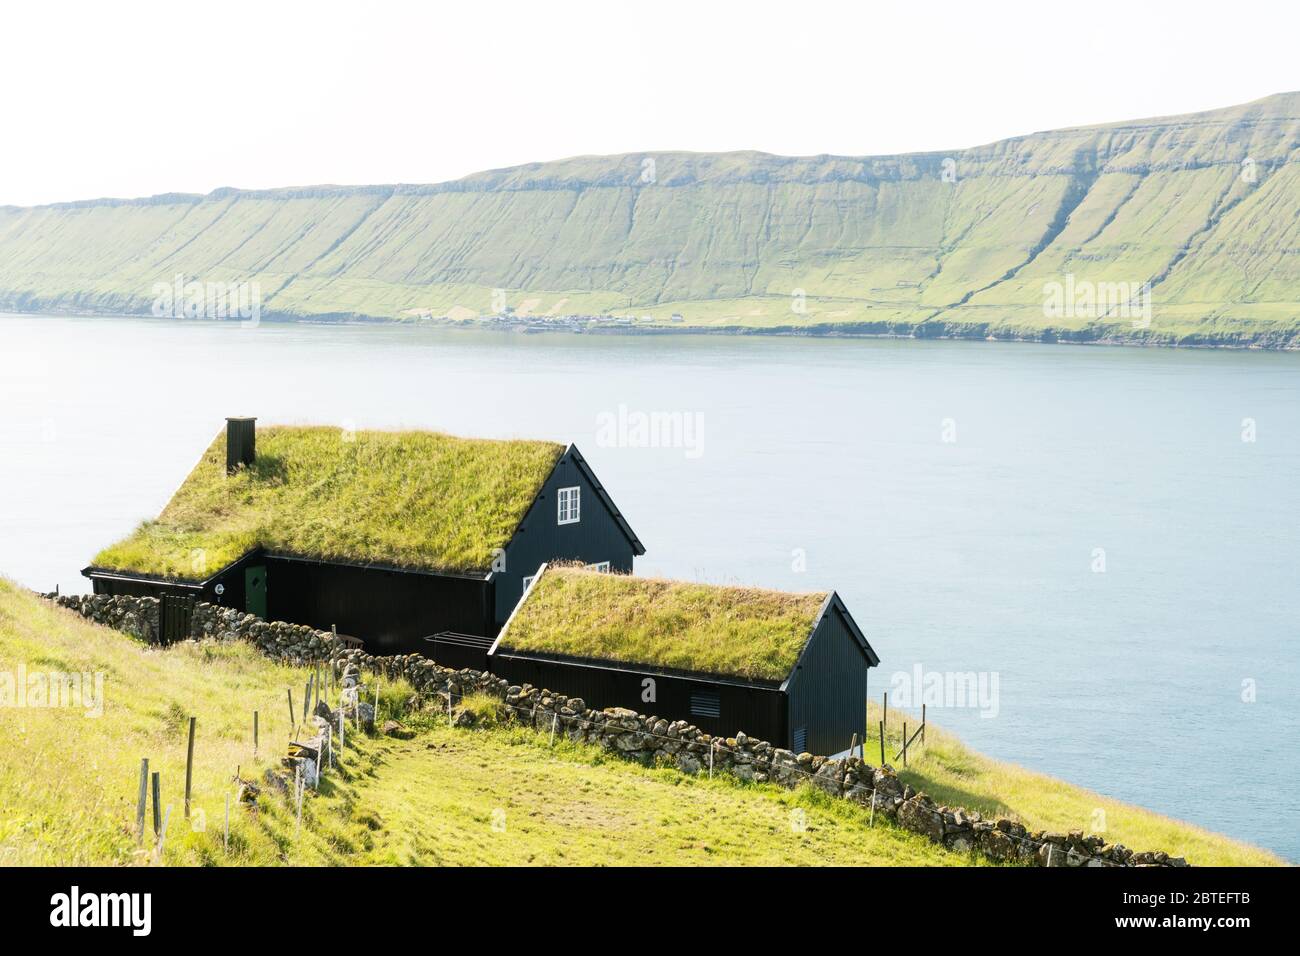 Foggy morning view of a house with grass roof in the Velbastadur village on Streymoy island, Faroe islands, Denmark. Landscape photography Stock Photo